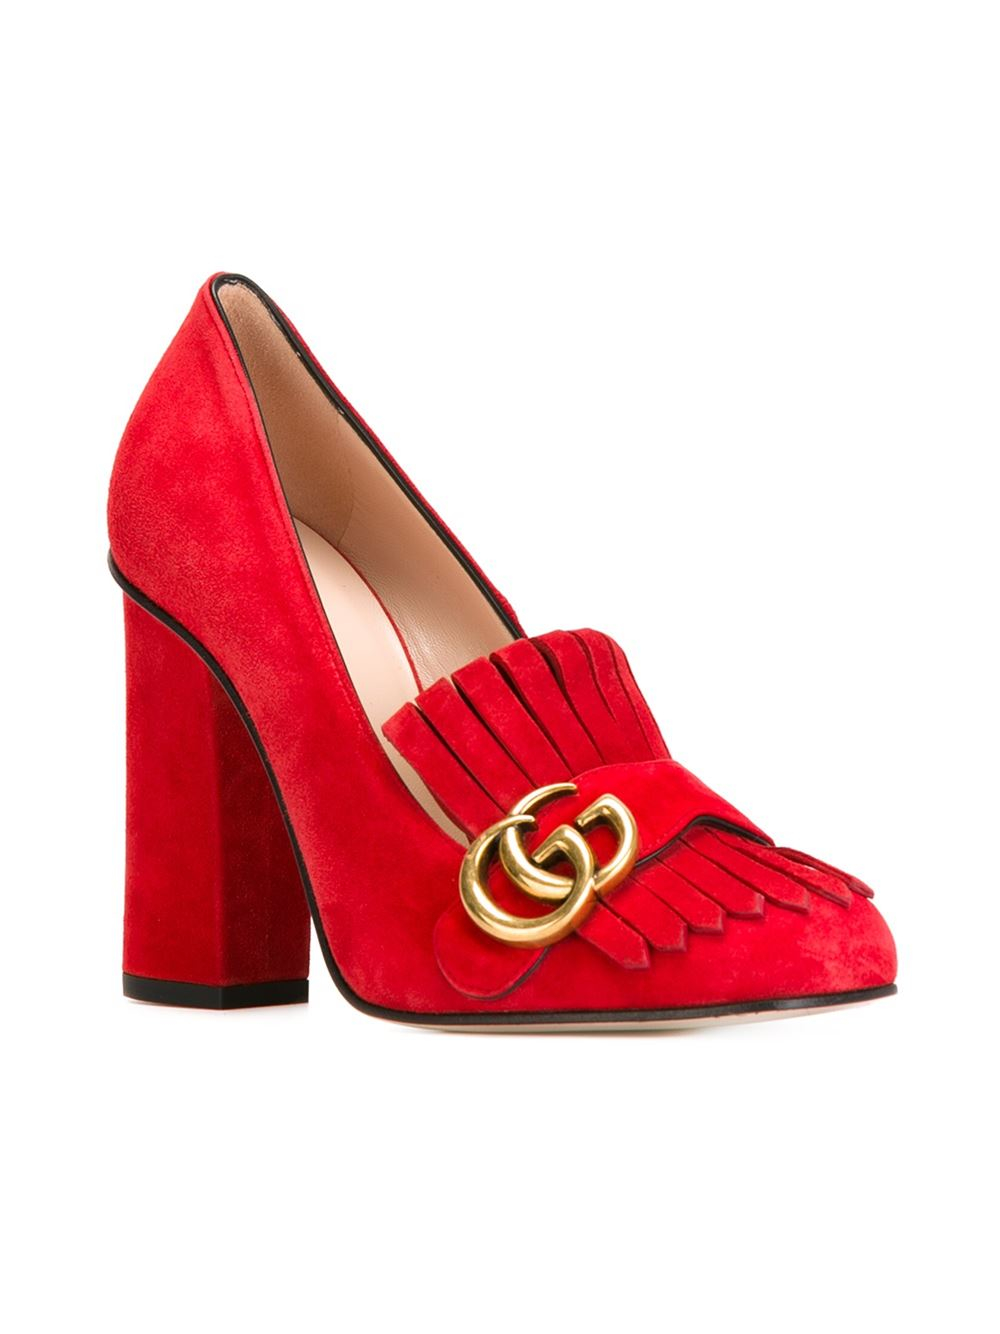 Gucci Shoes With Fringes Details And Double G in Red Lyst